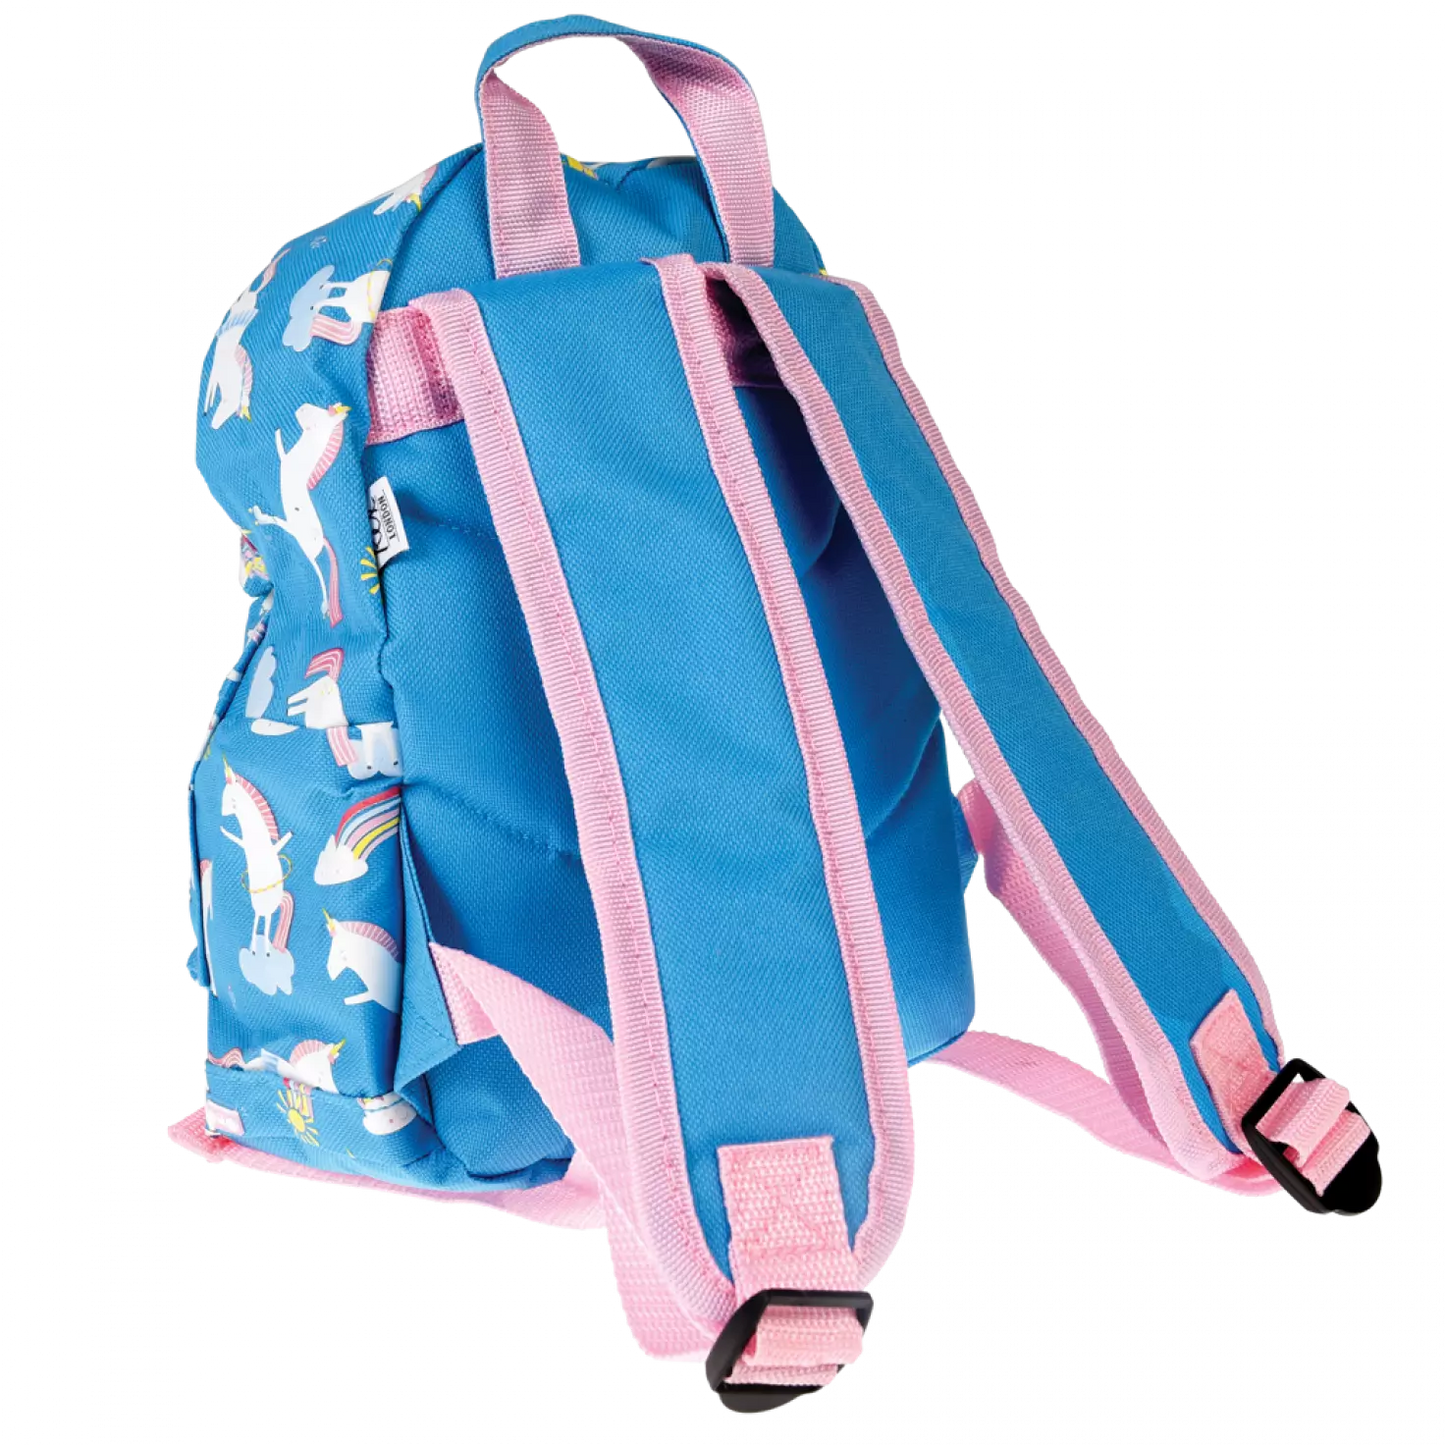 A child's backpack by Rex London, style Magical Unicorn,in blue with white multi unicorn and rainbow print, two compartments and zip fastenings. Left side view of padded straps.